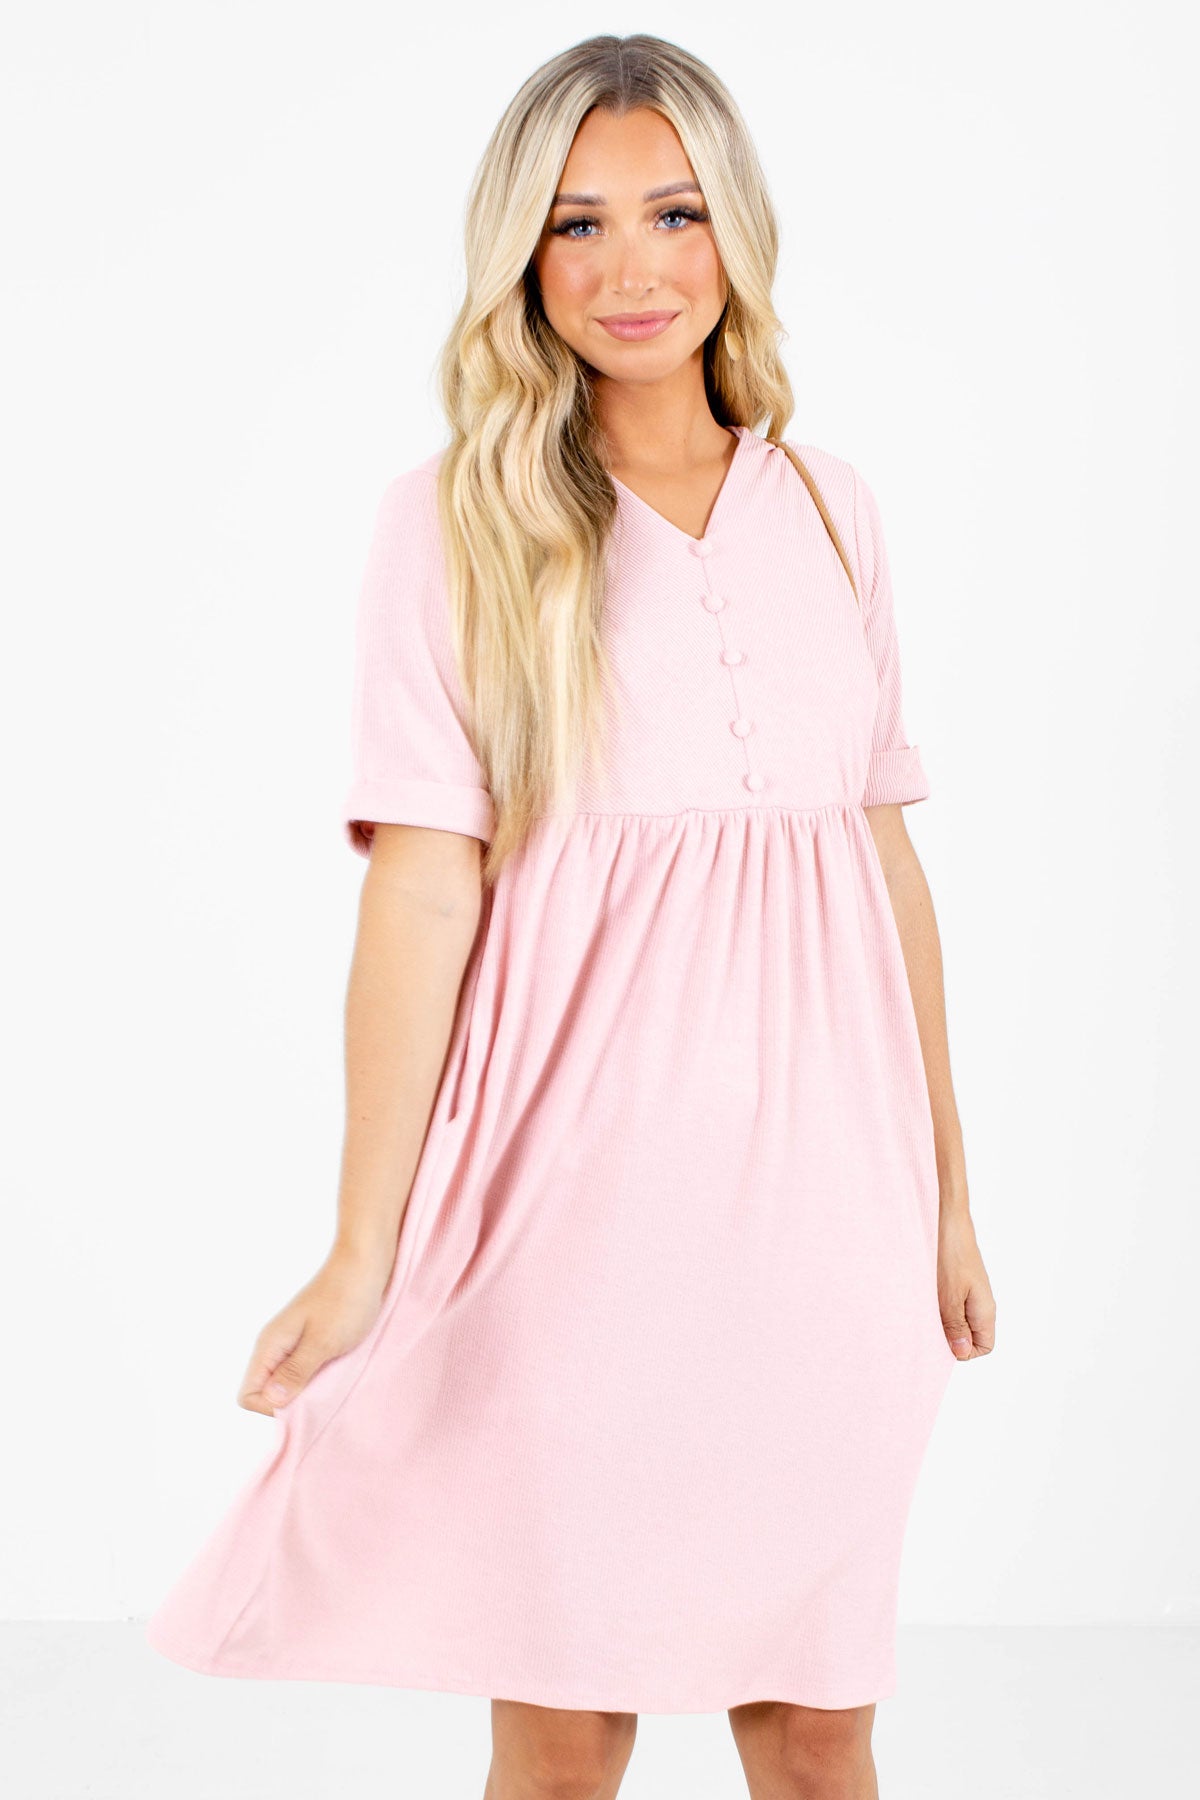 Pink Cute and Comfortable Boutique Knee-Length Dresses for Women